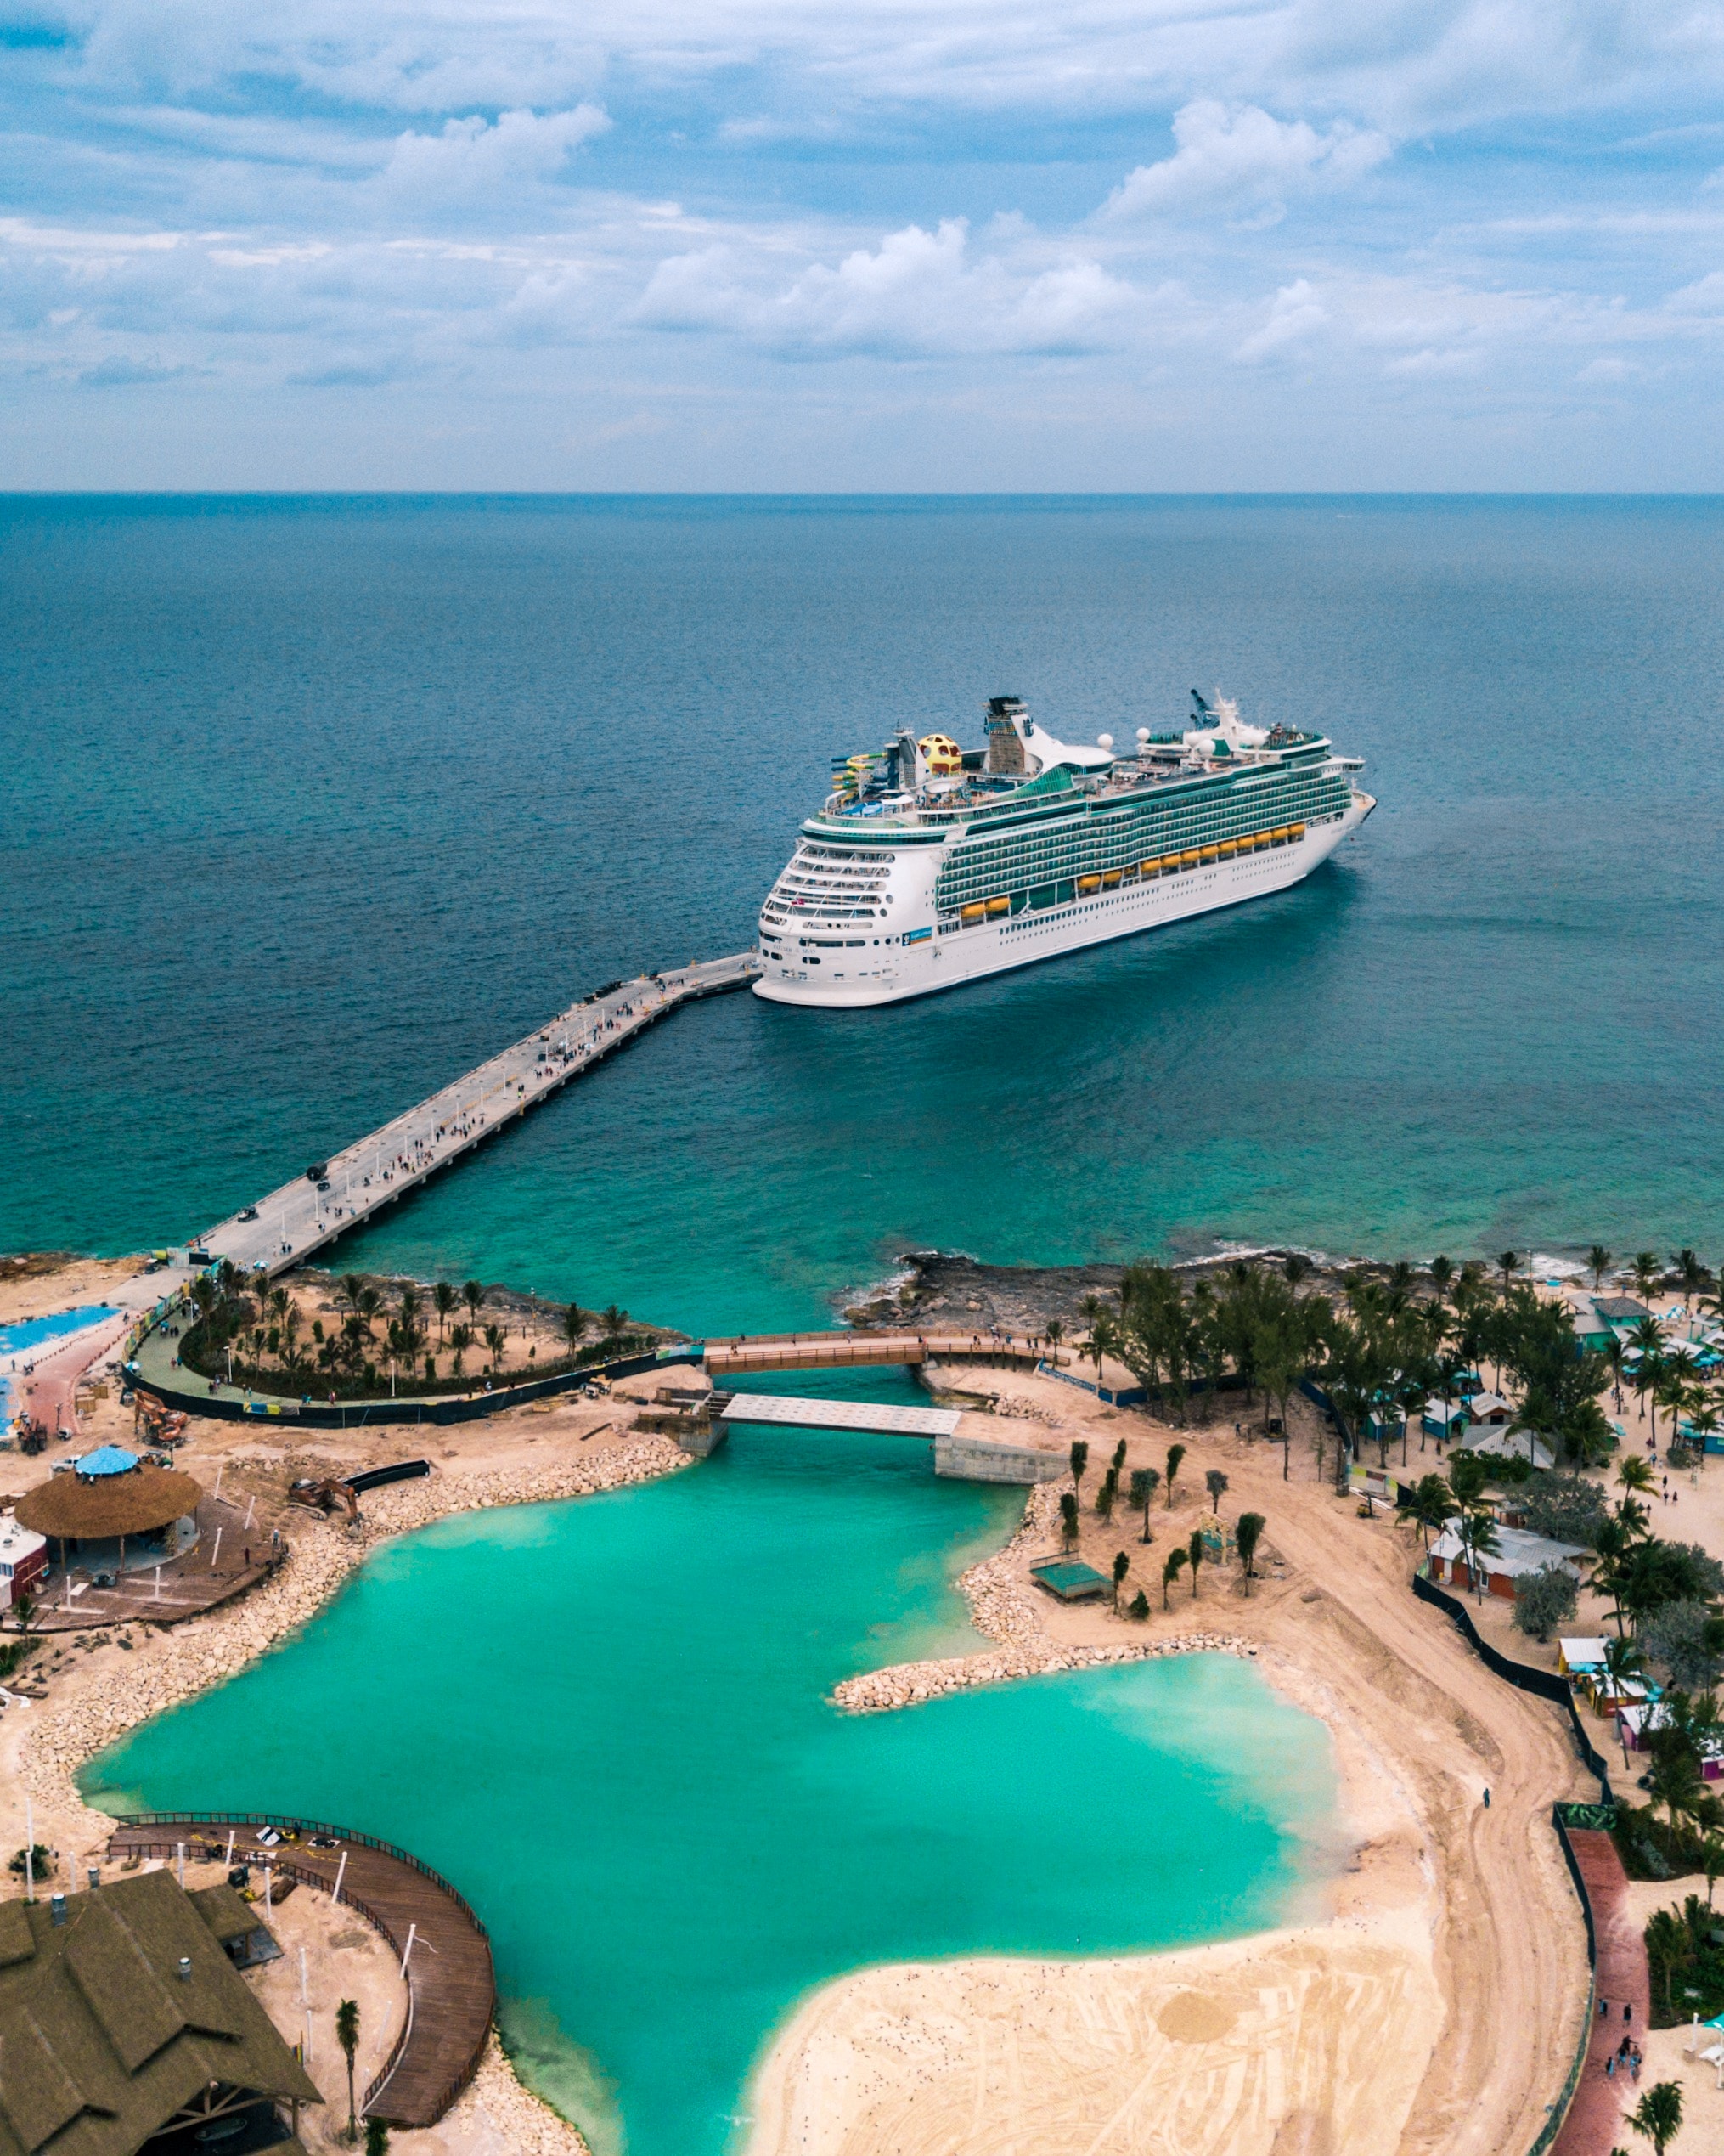 All-Inclusive Resorts vs. Cruises: Which One Should You Choose?